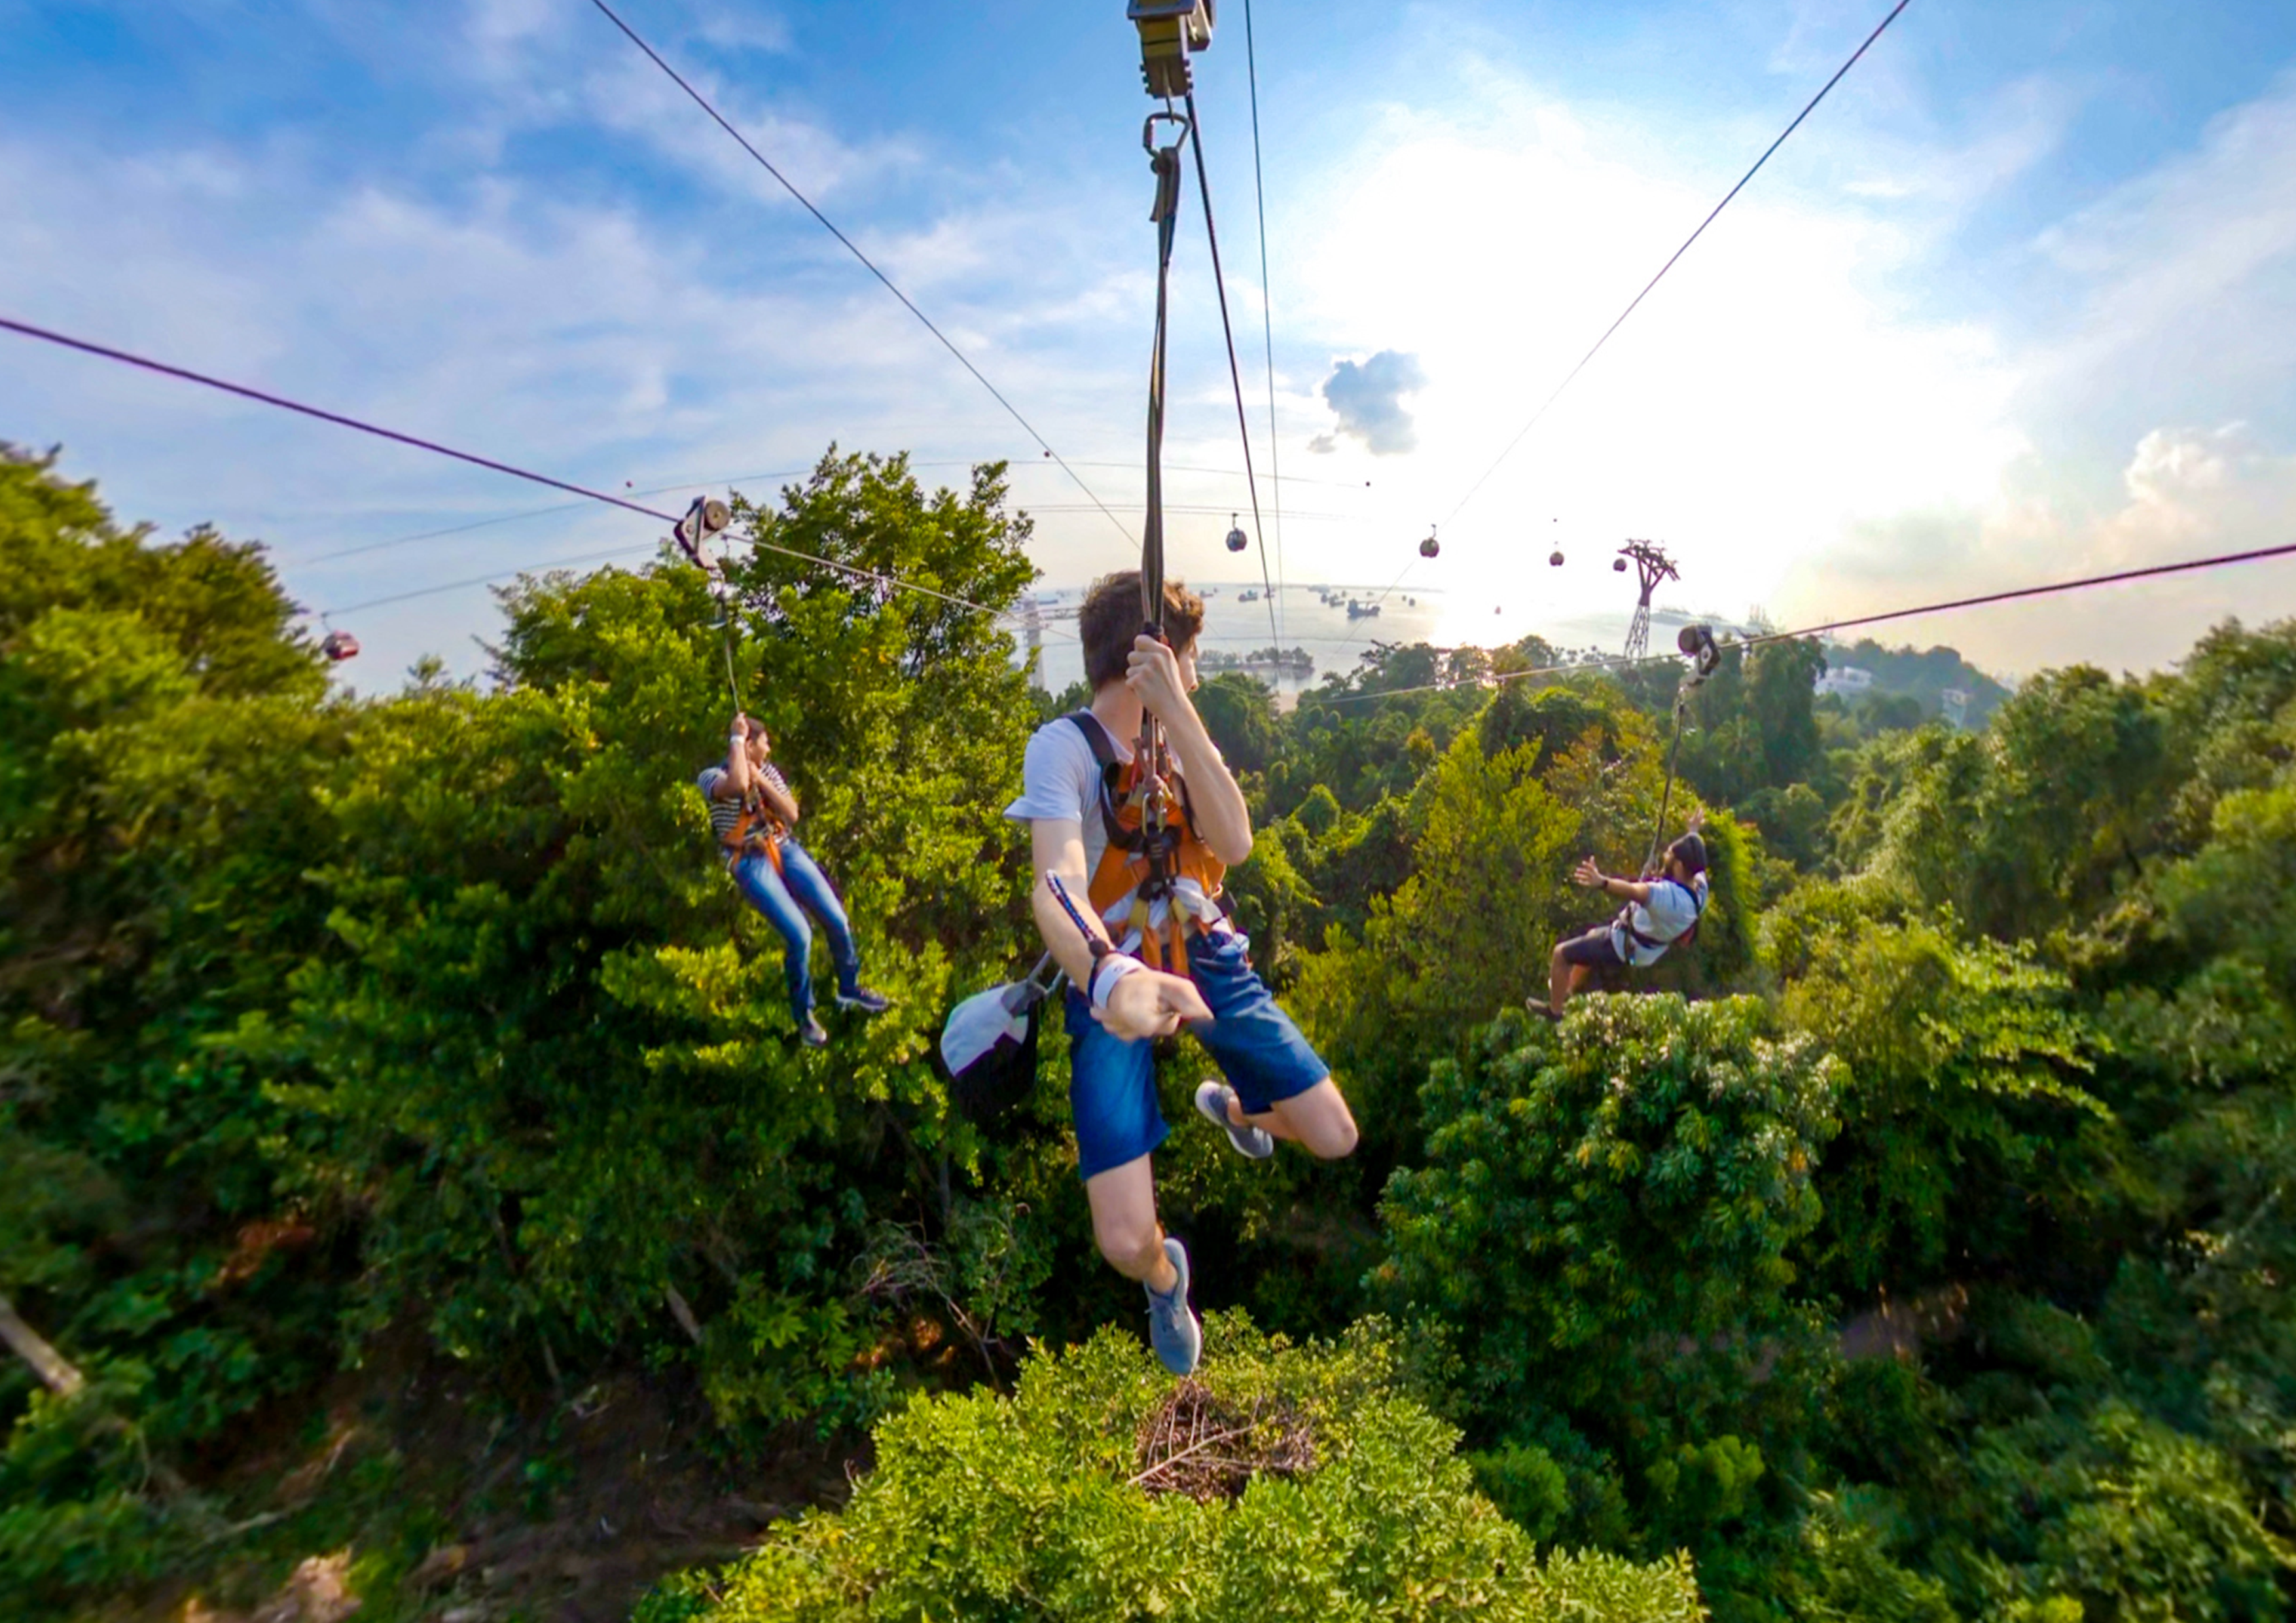 For a high-octane route to the beach, jump on the Sentosa zipwire